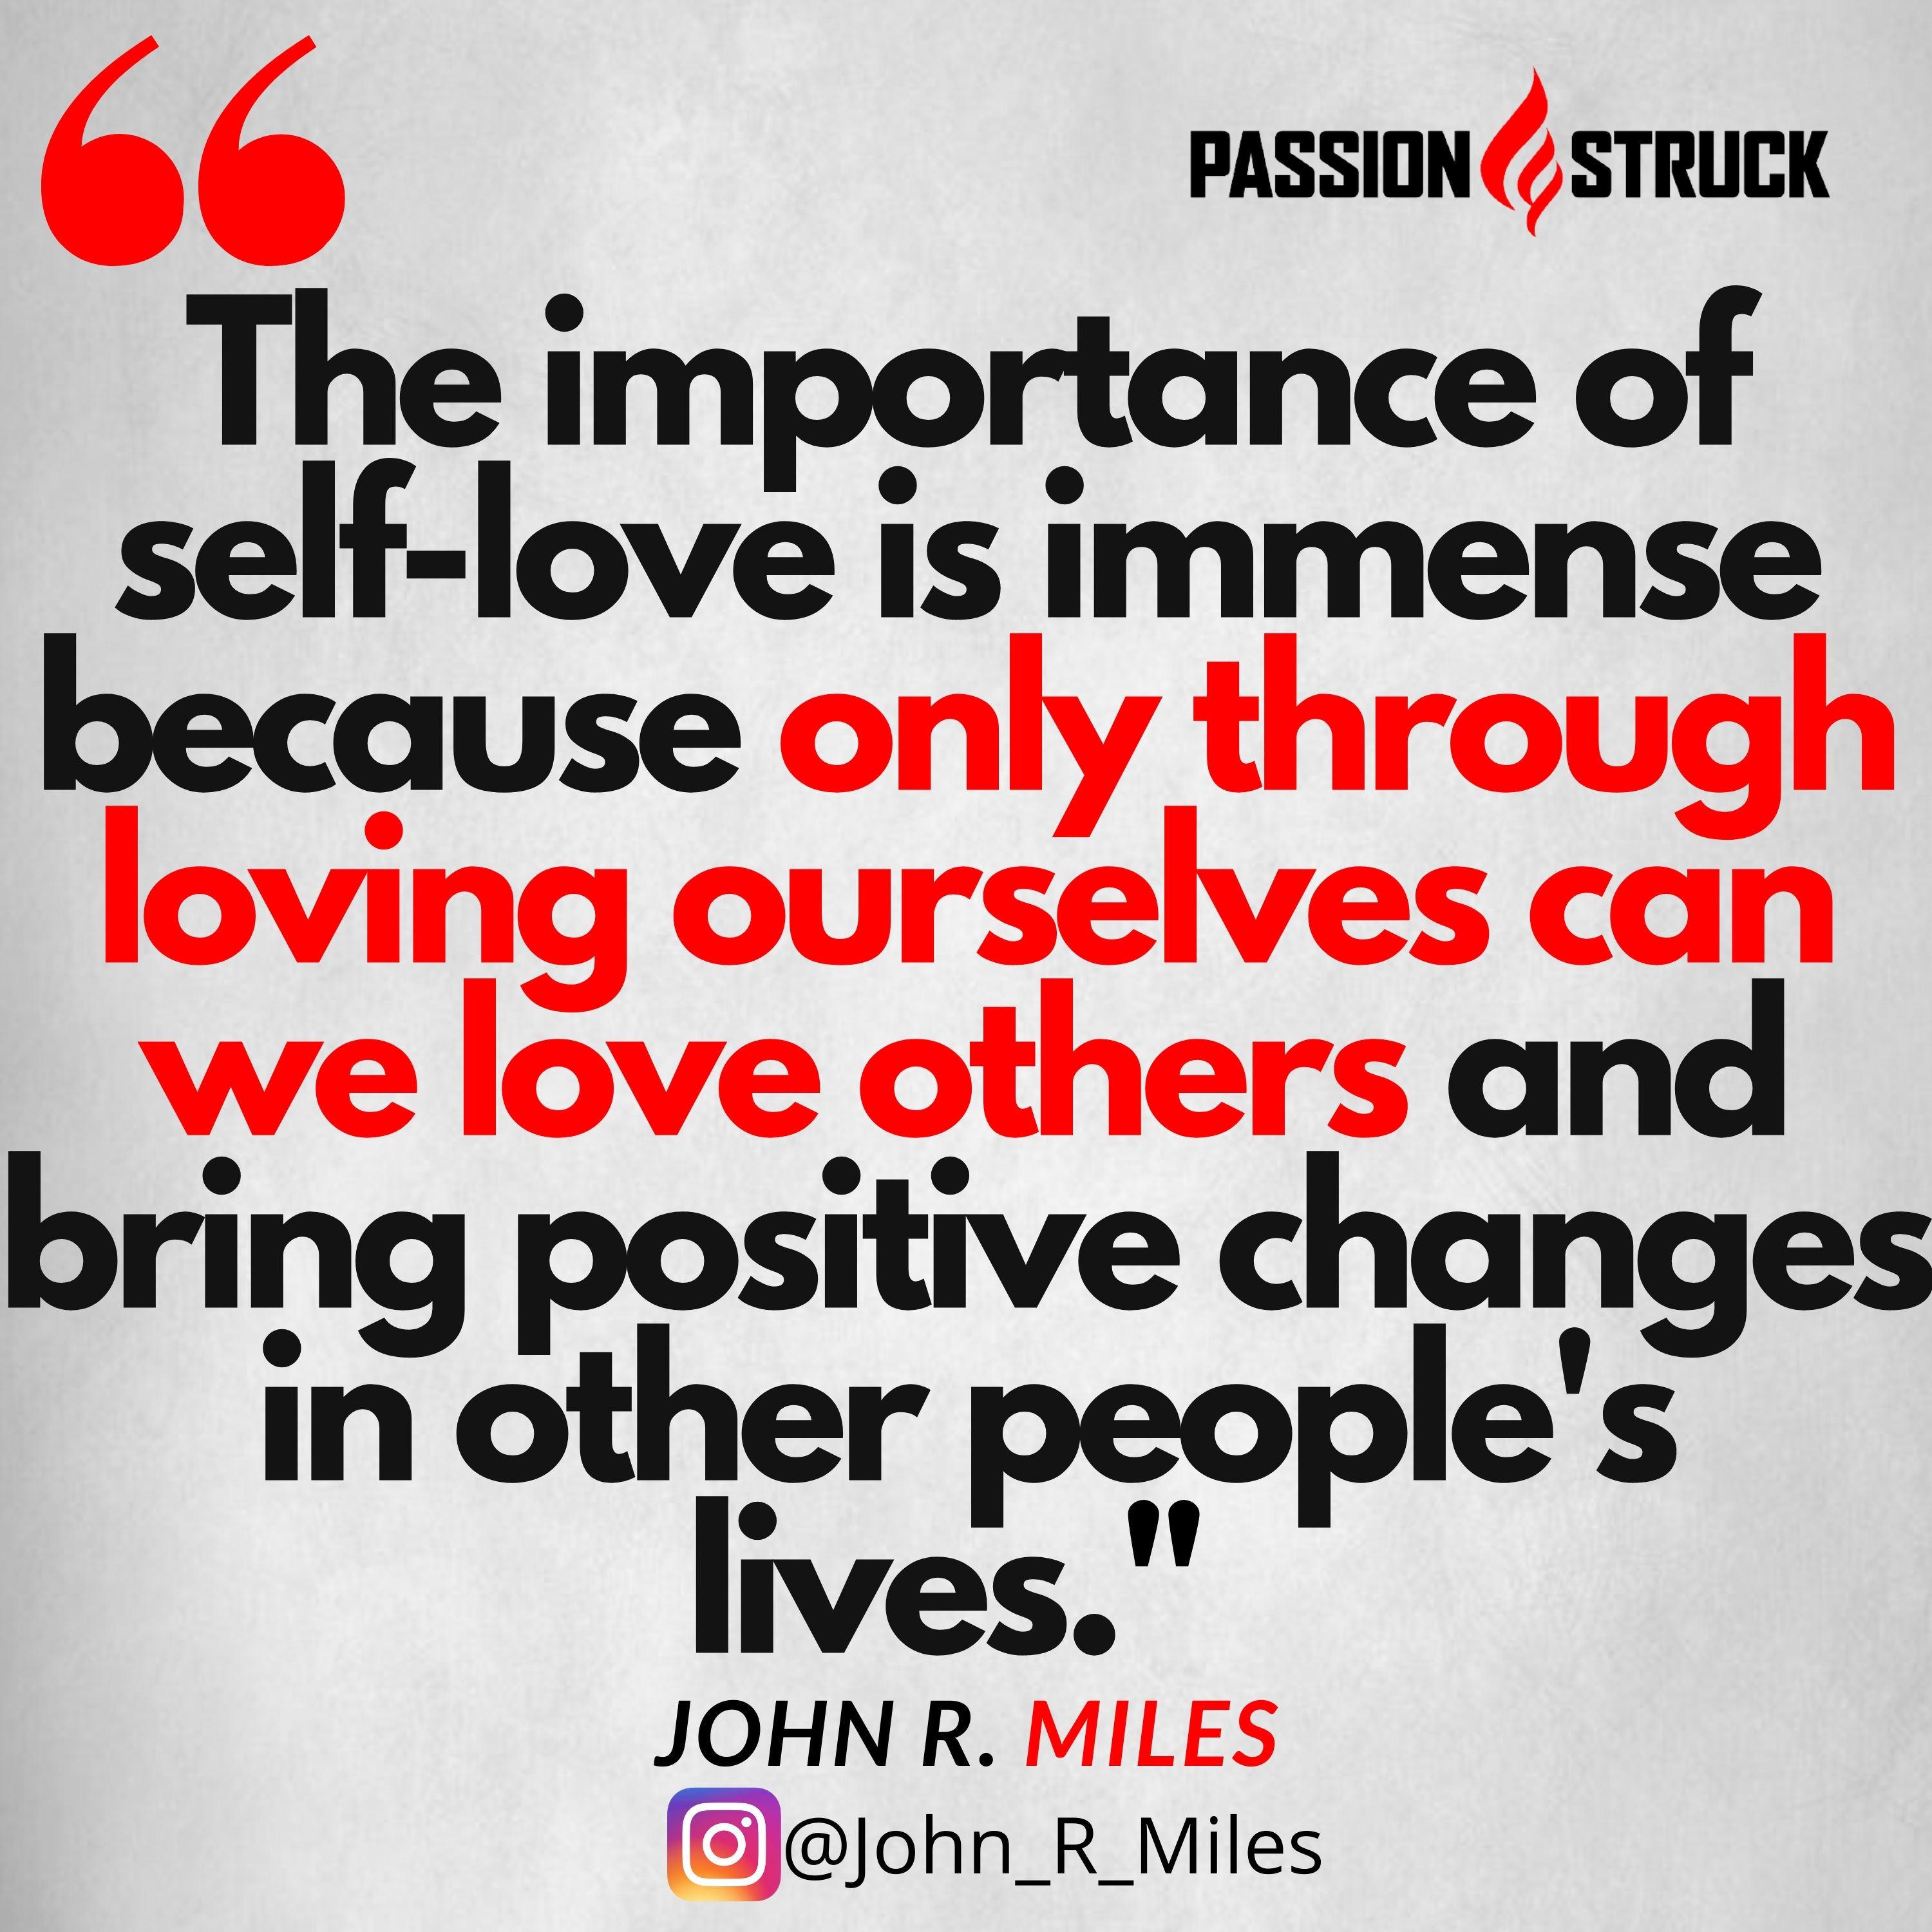 John R. Miles quote on the importance of self love